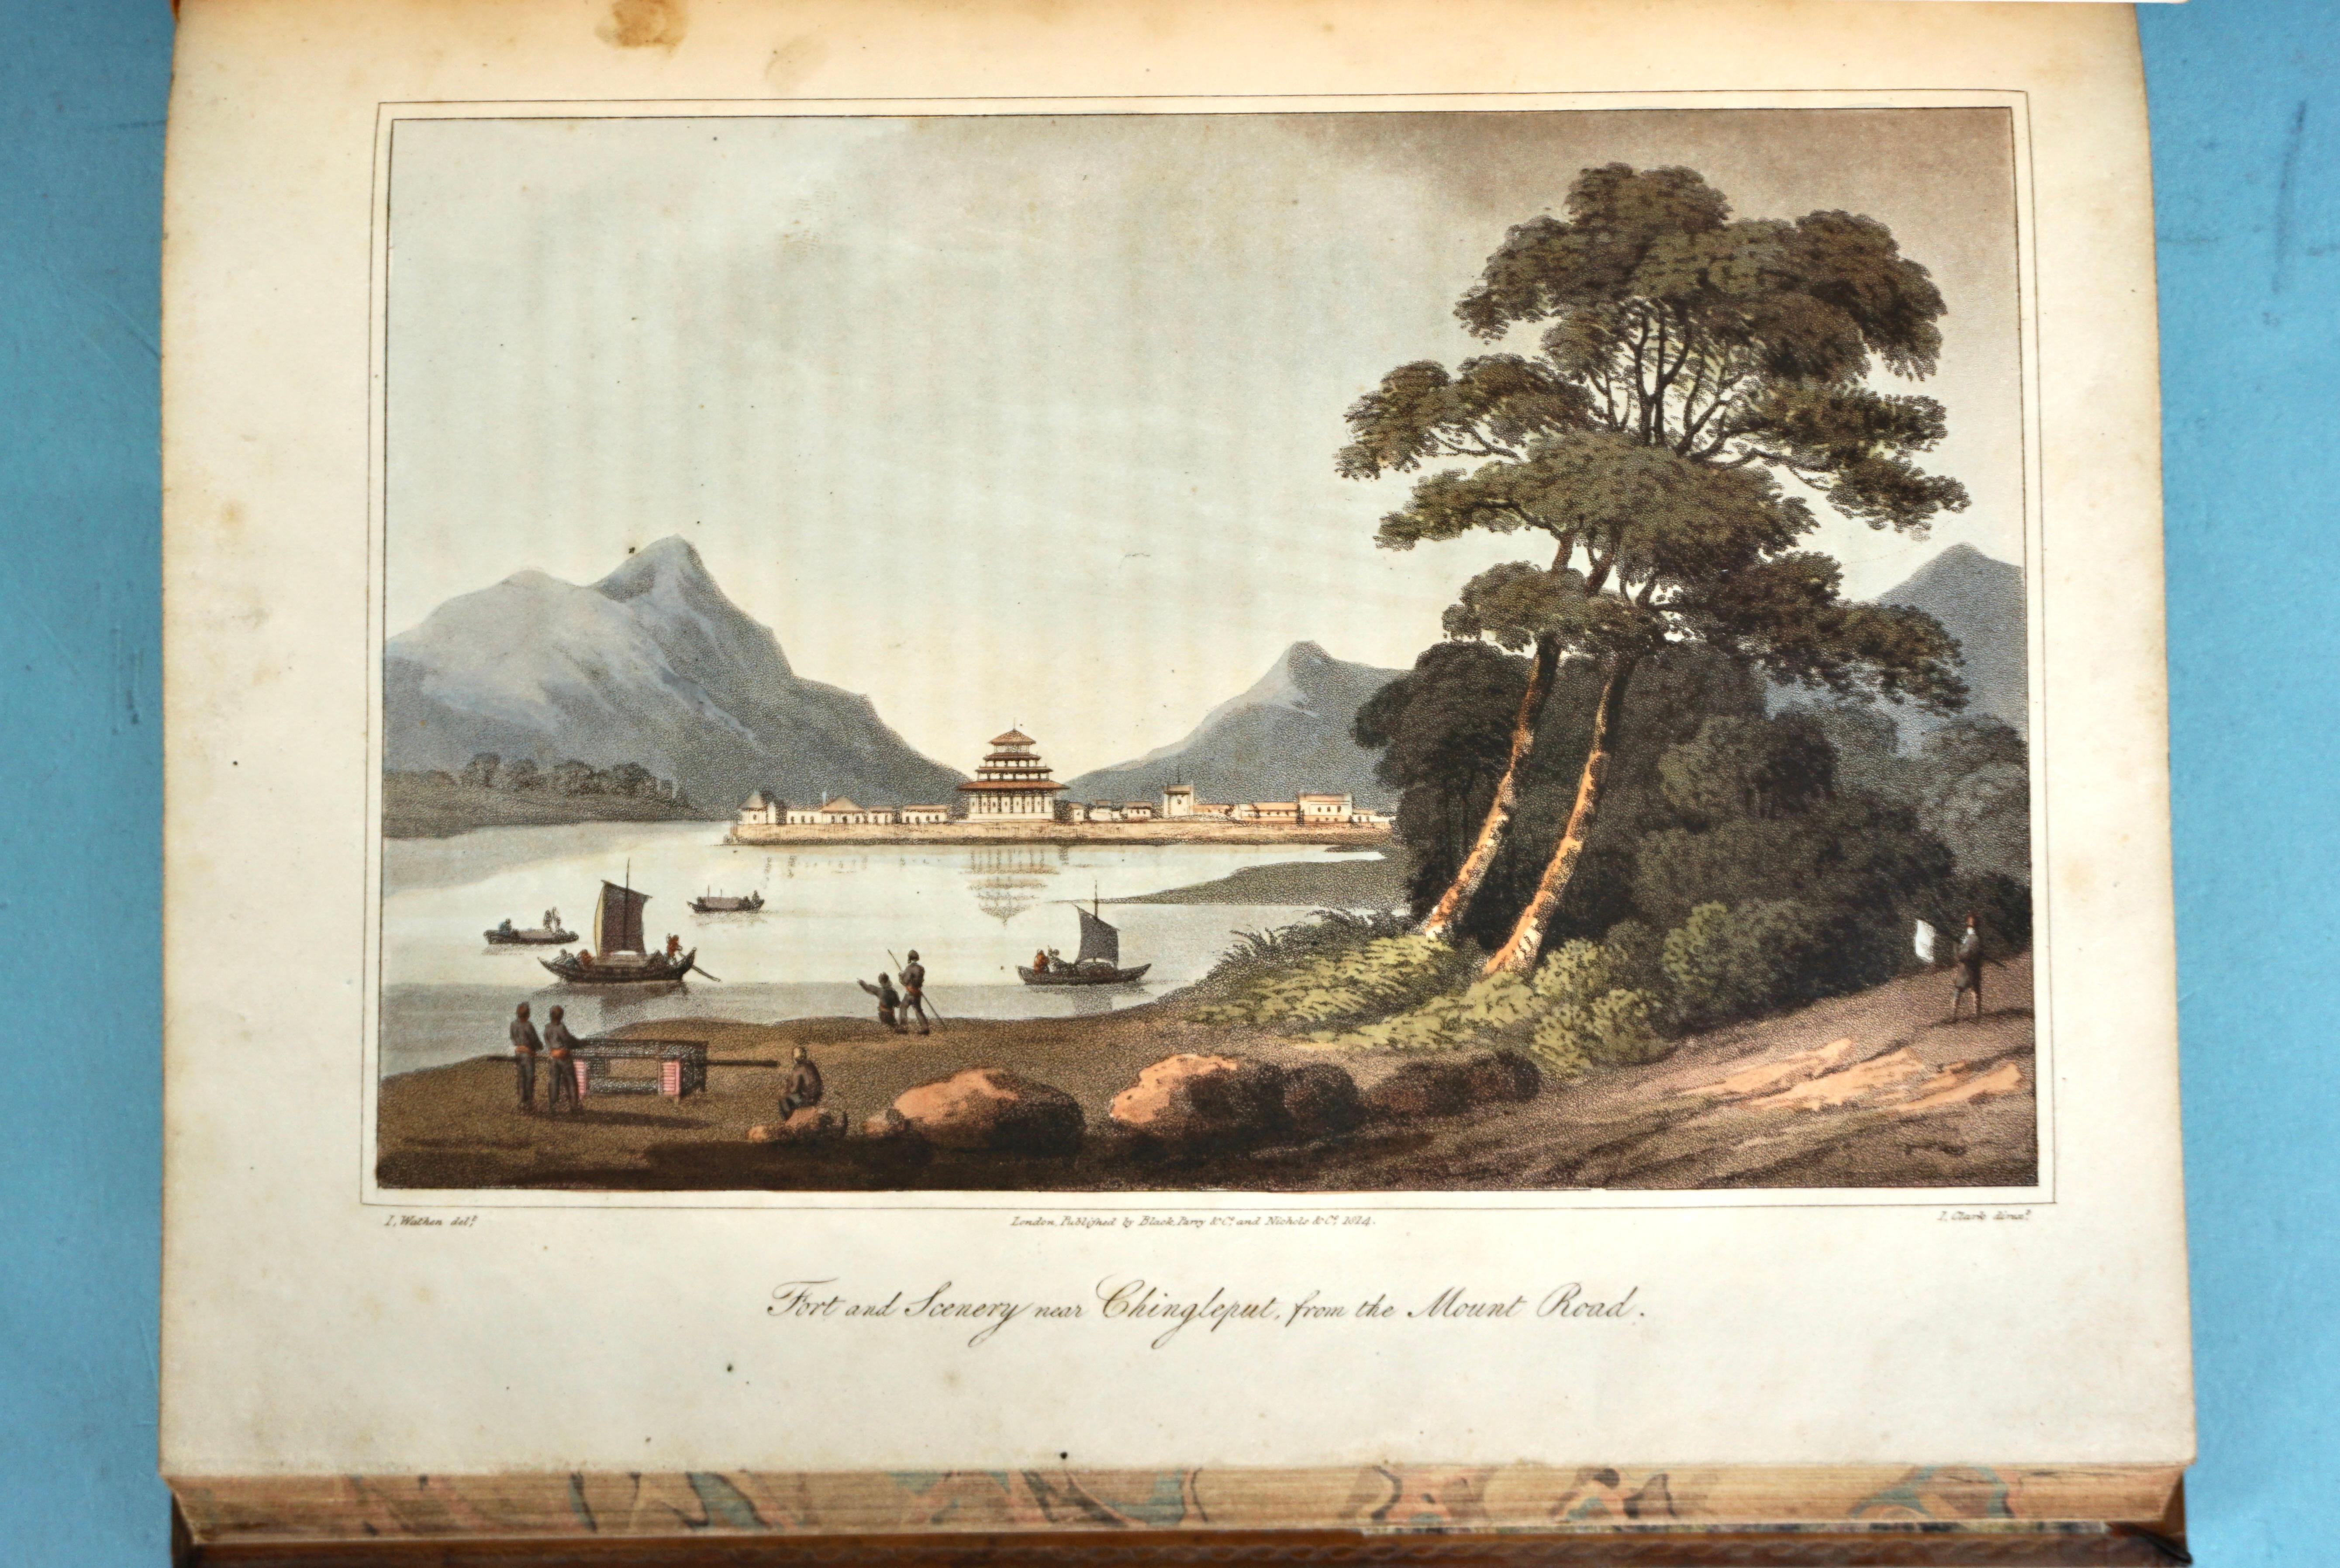 Leather Journal of a Voyage to Madras and India in 1812-1813 with 24 Hand Colored Prints